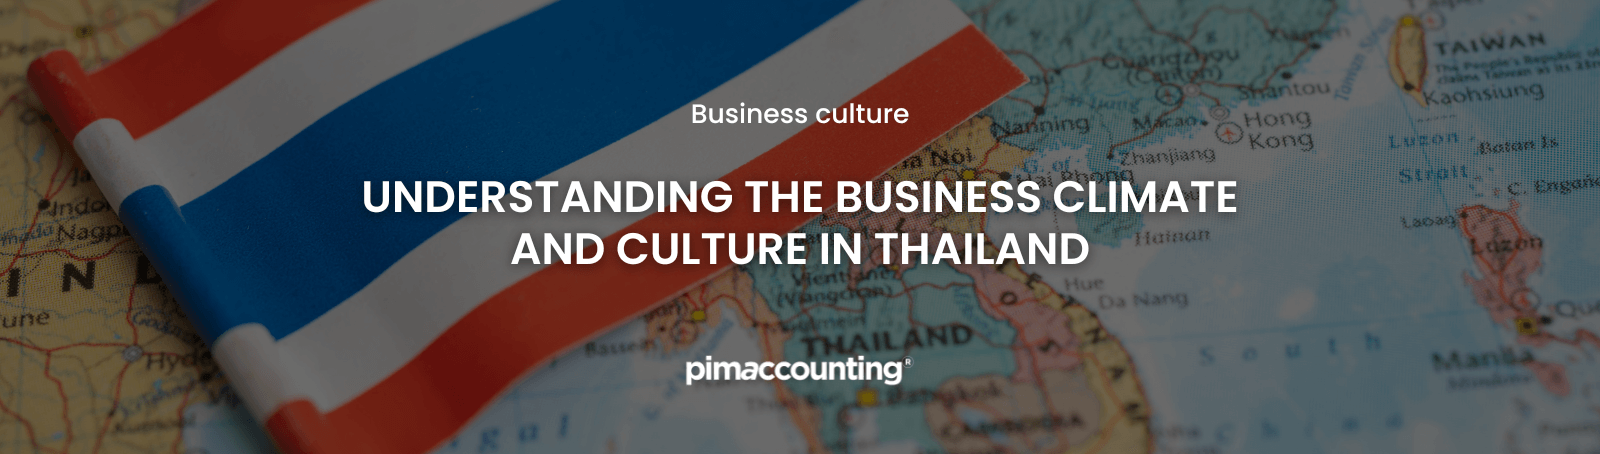 Understanding the Business Climate and Culture in Thailand